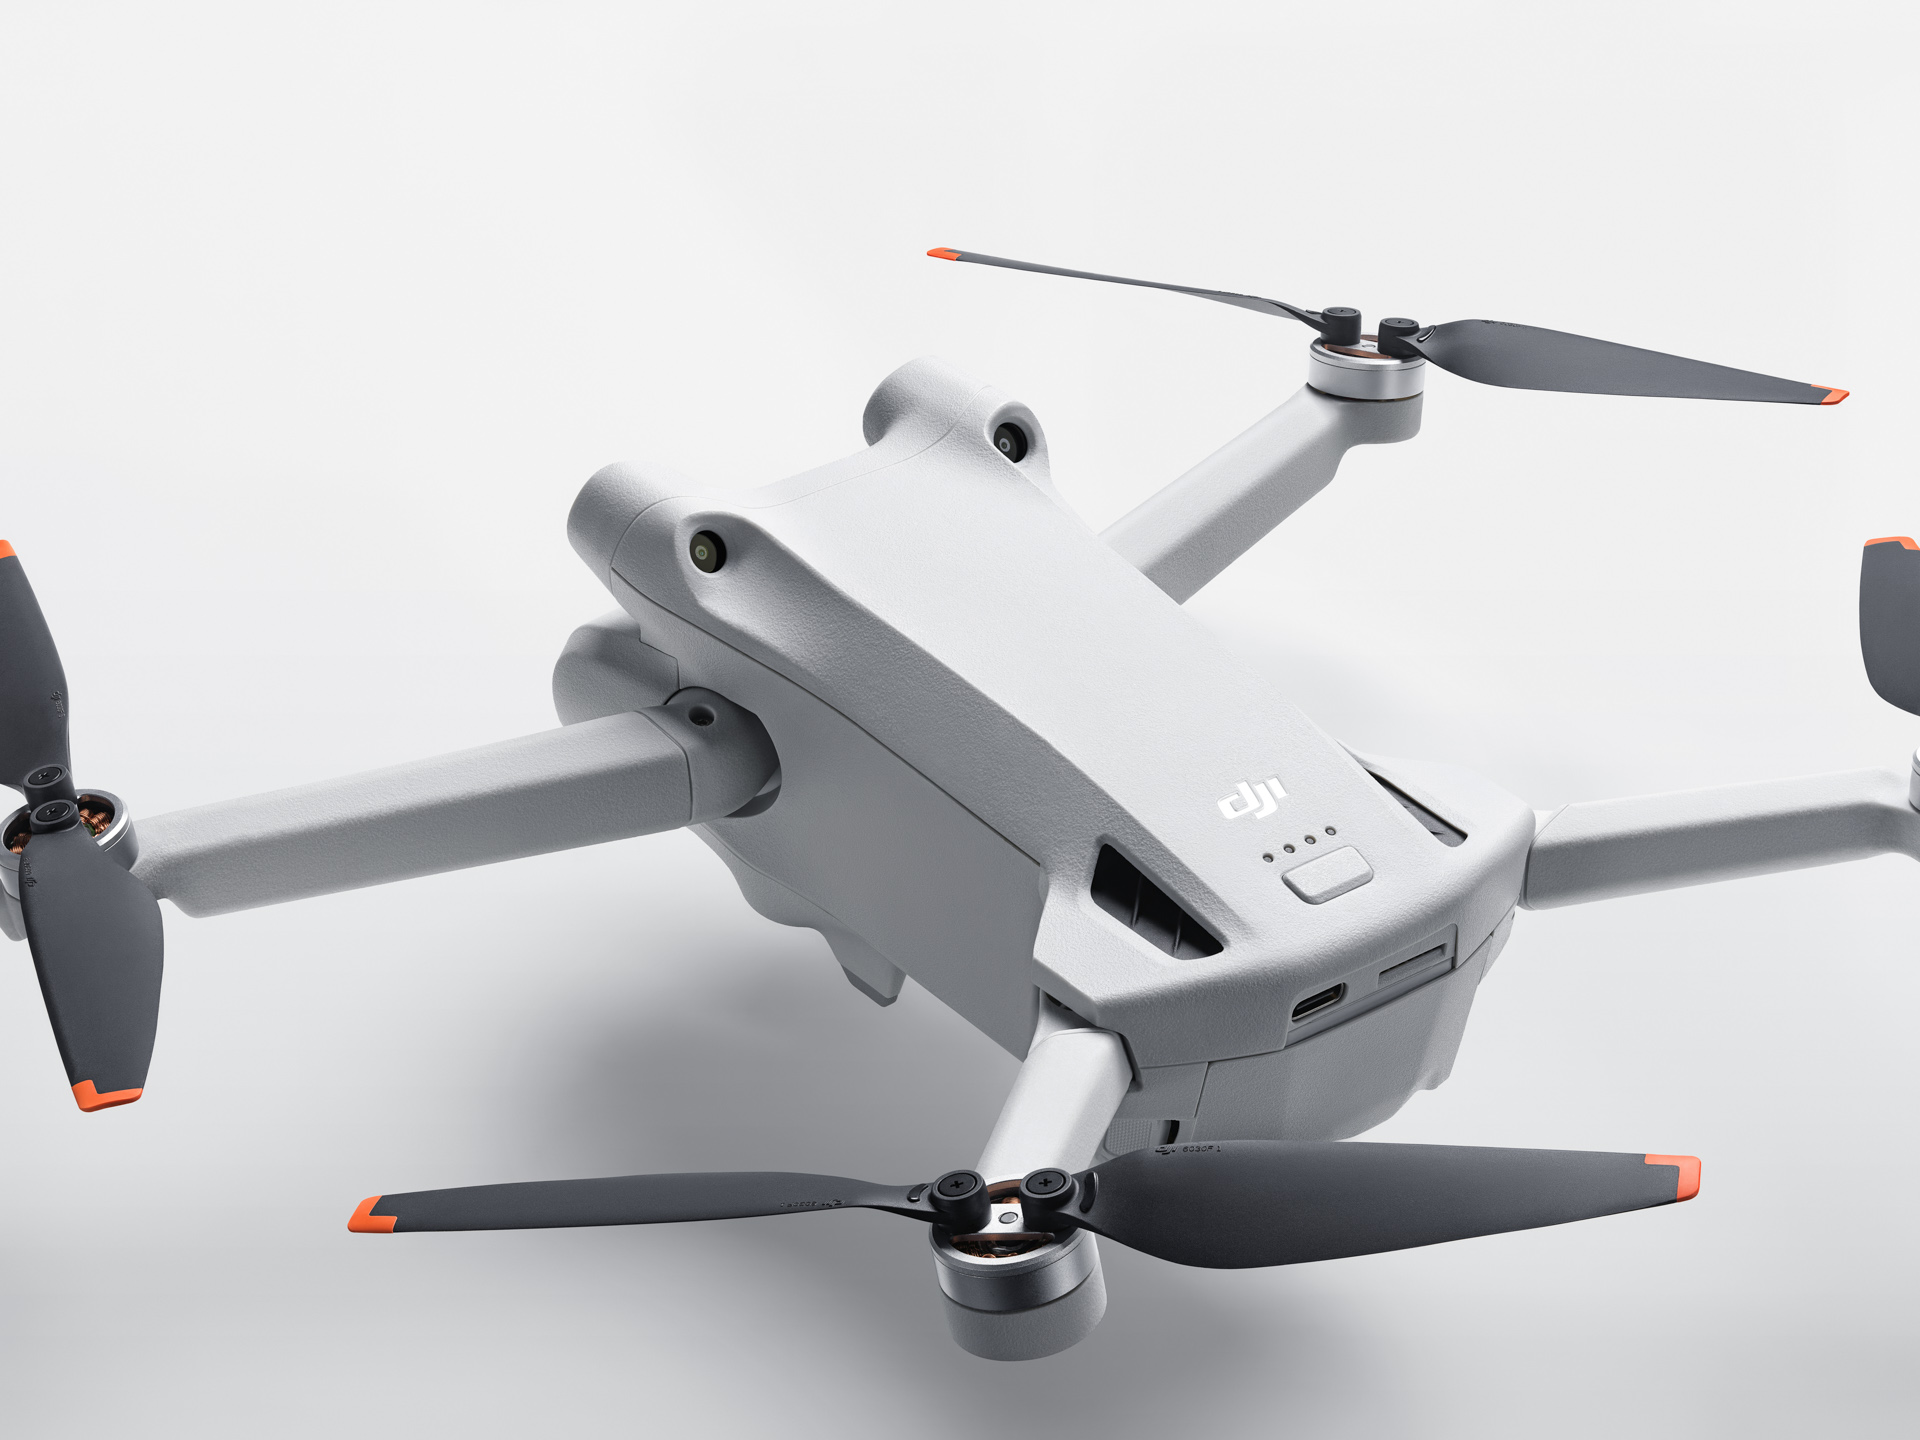 DJI's entry-level Mini 3 Pro drone arrives priced at $669